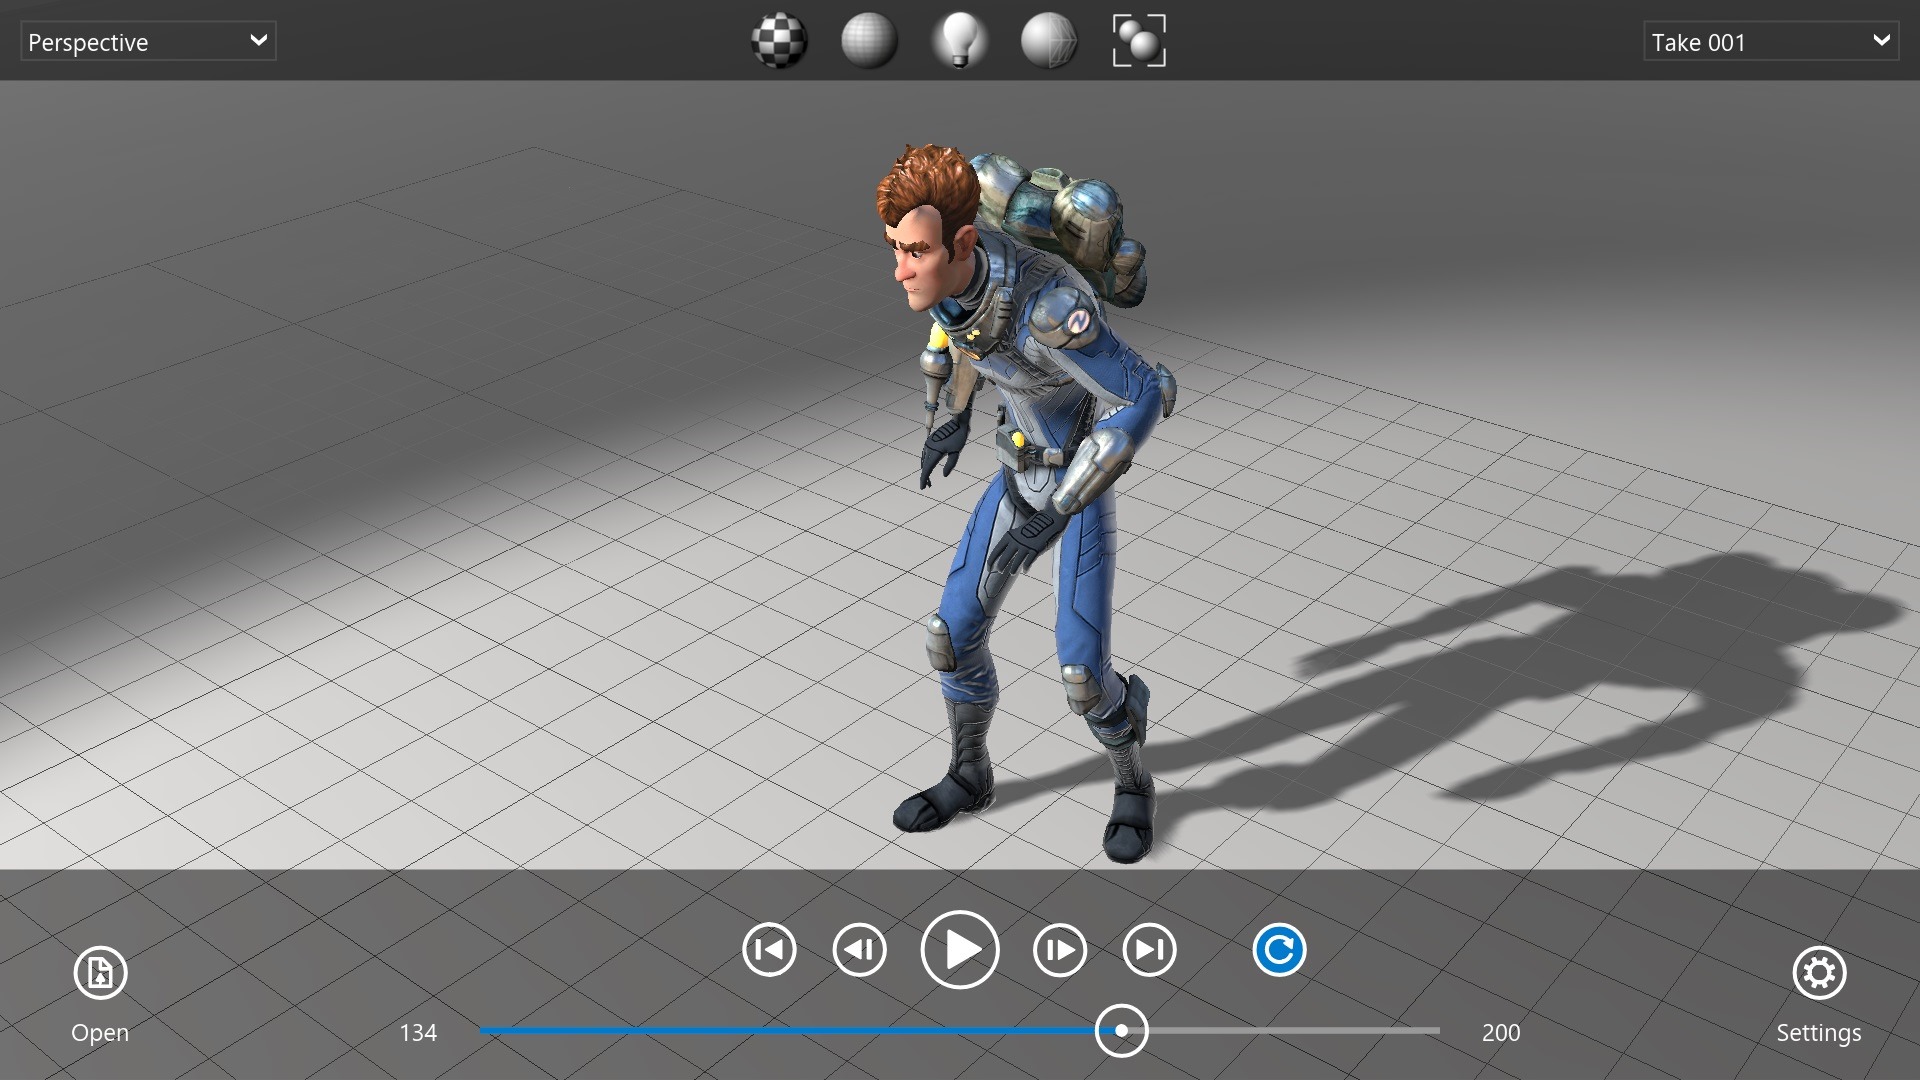 Review 3D Models on your Windows 8 PC with the Autodesk FBX Review App |  Windows Experience Blog